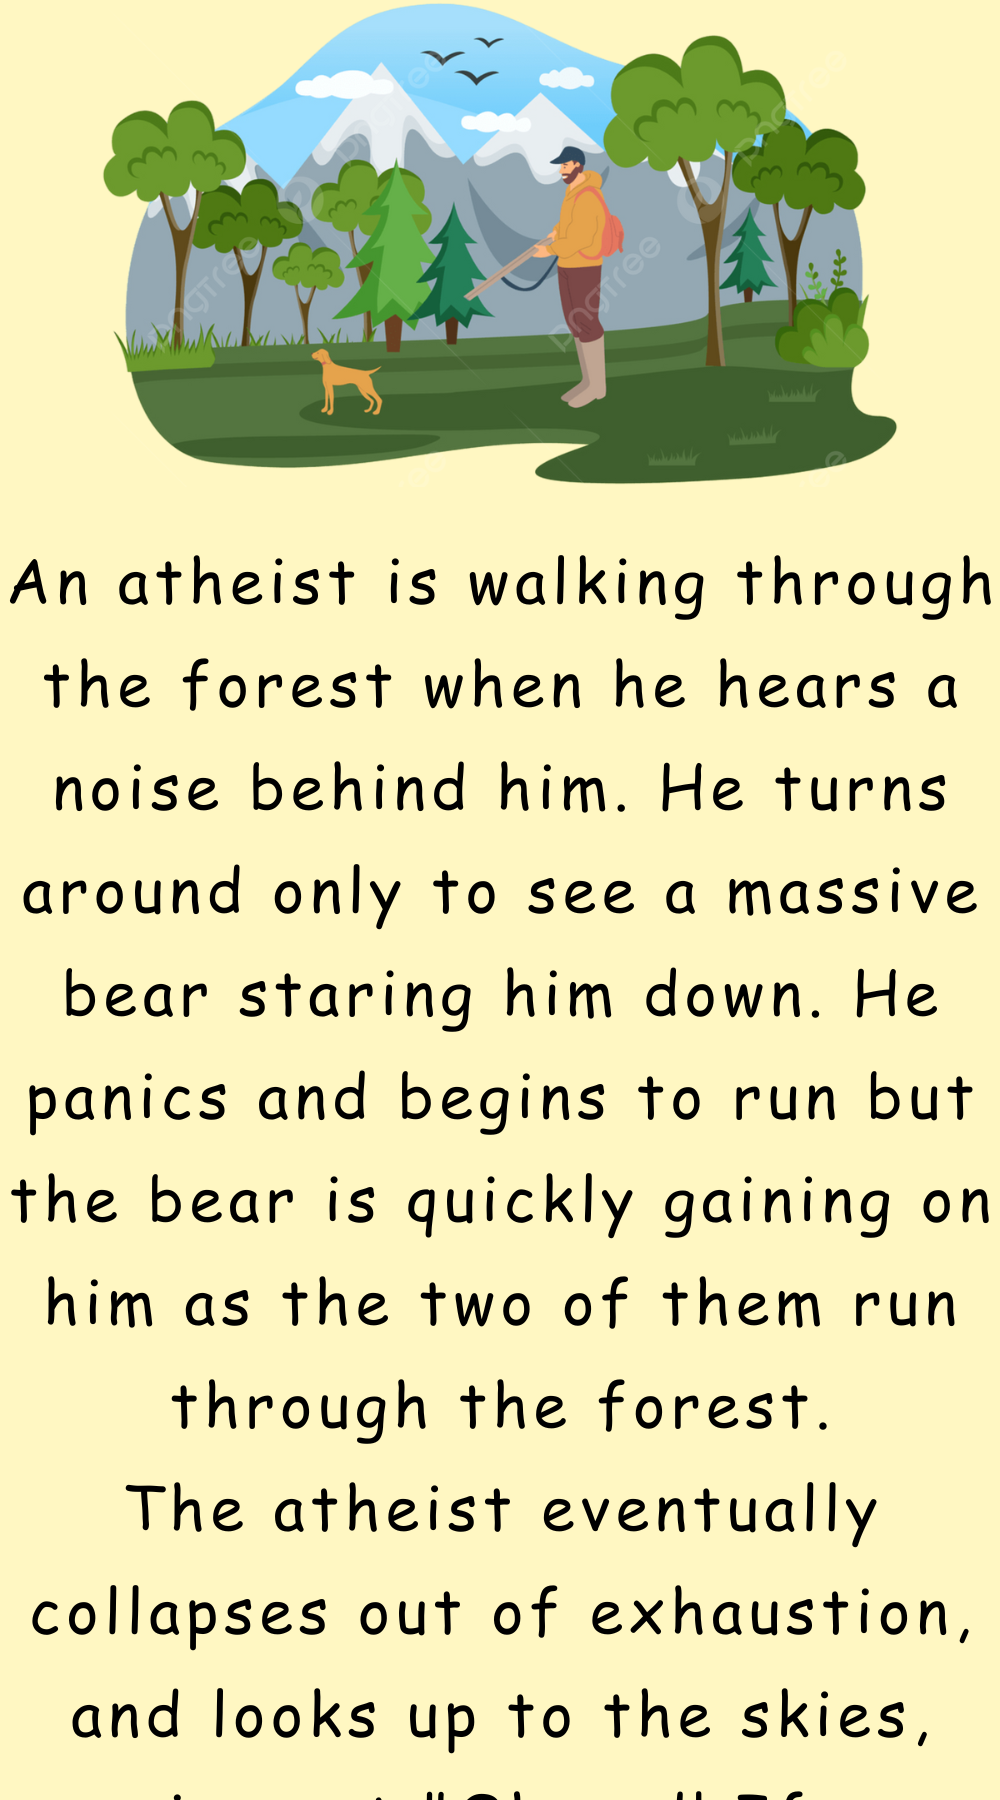 An atheist is walking through the forest